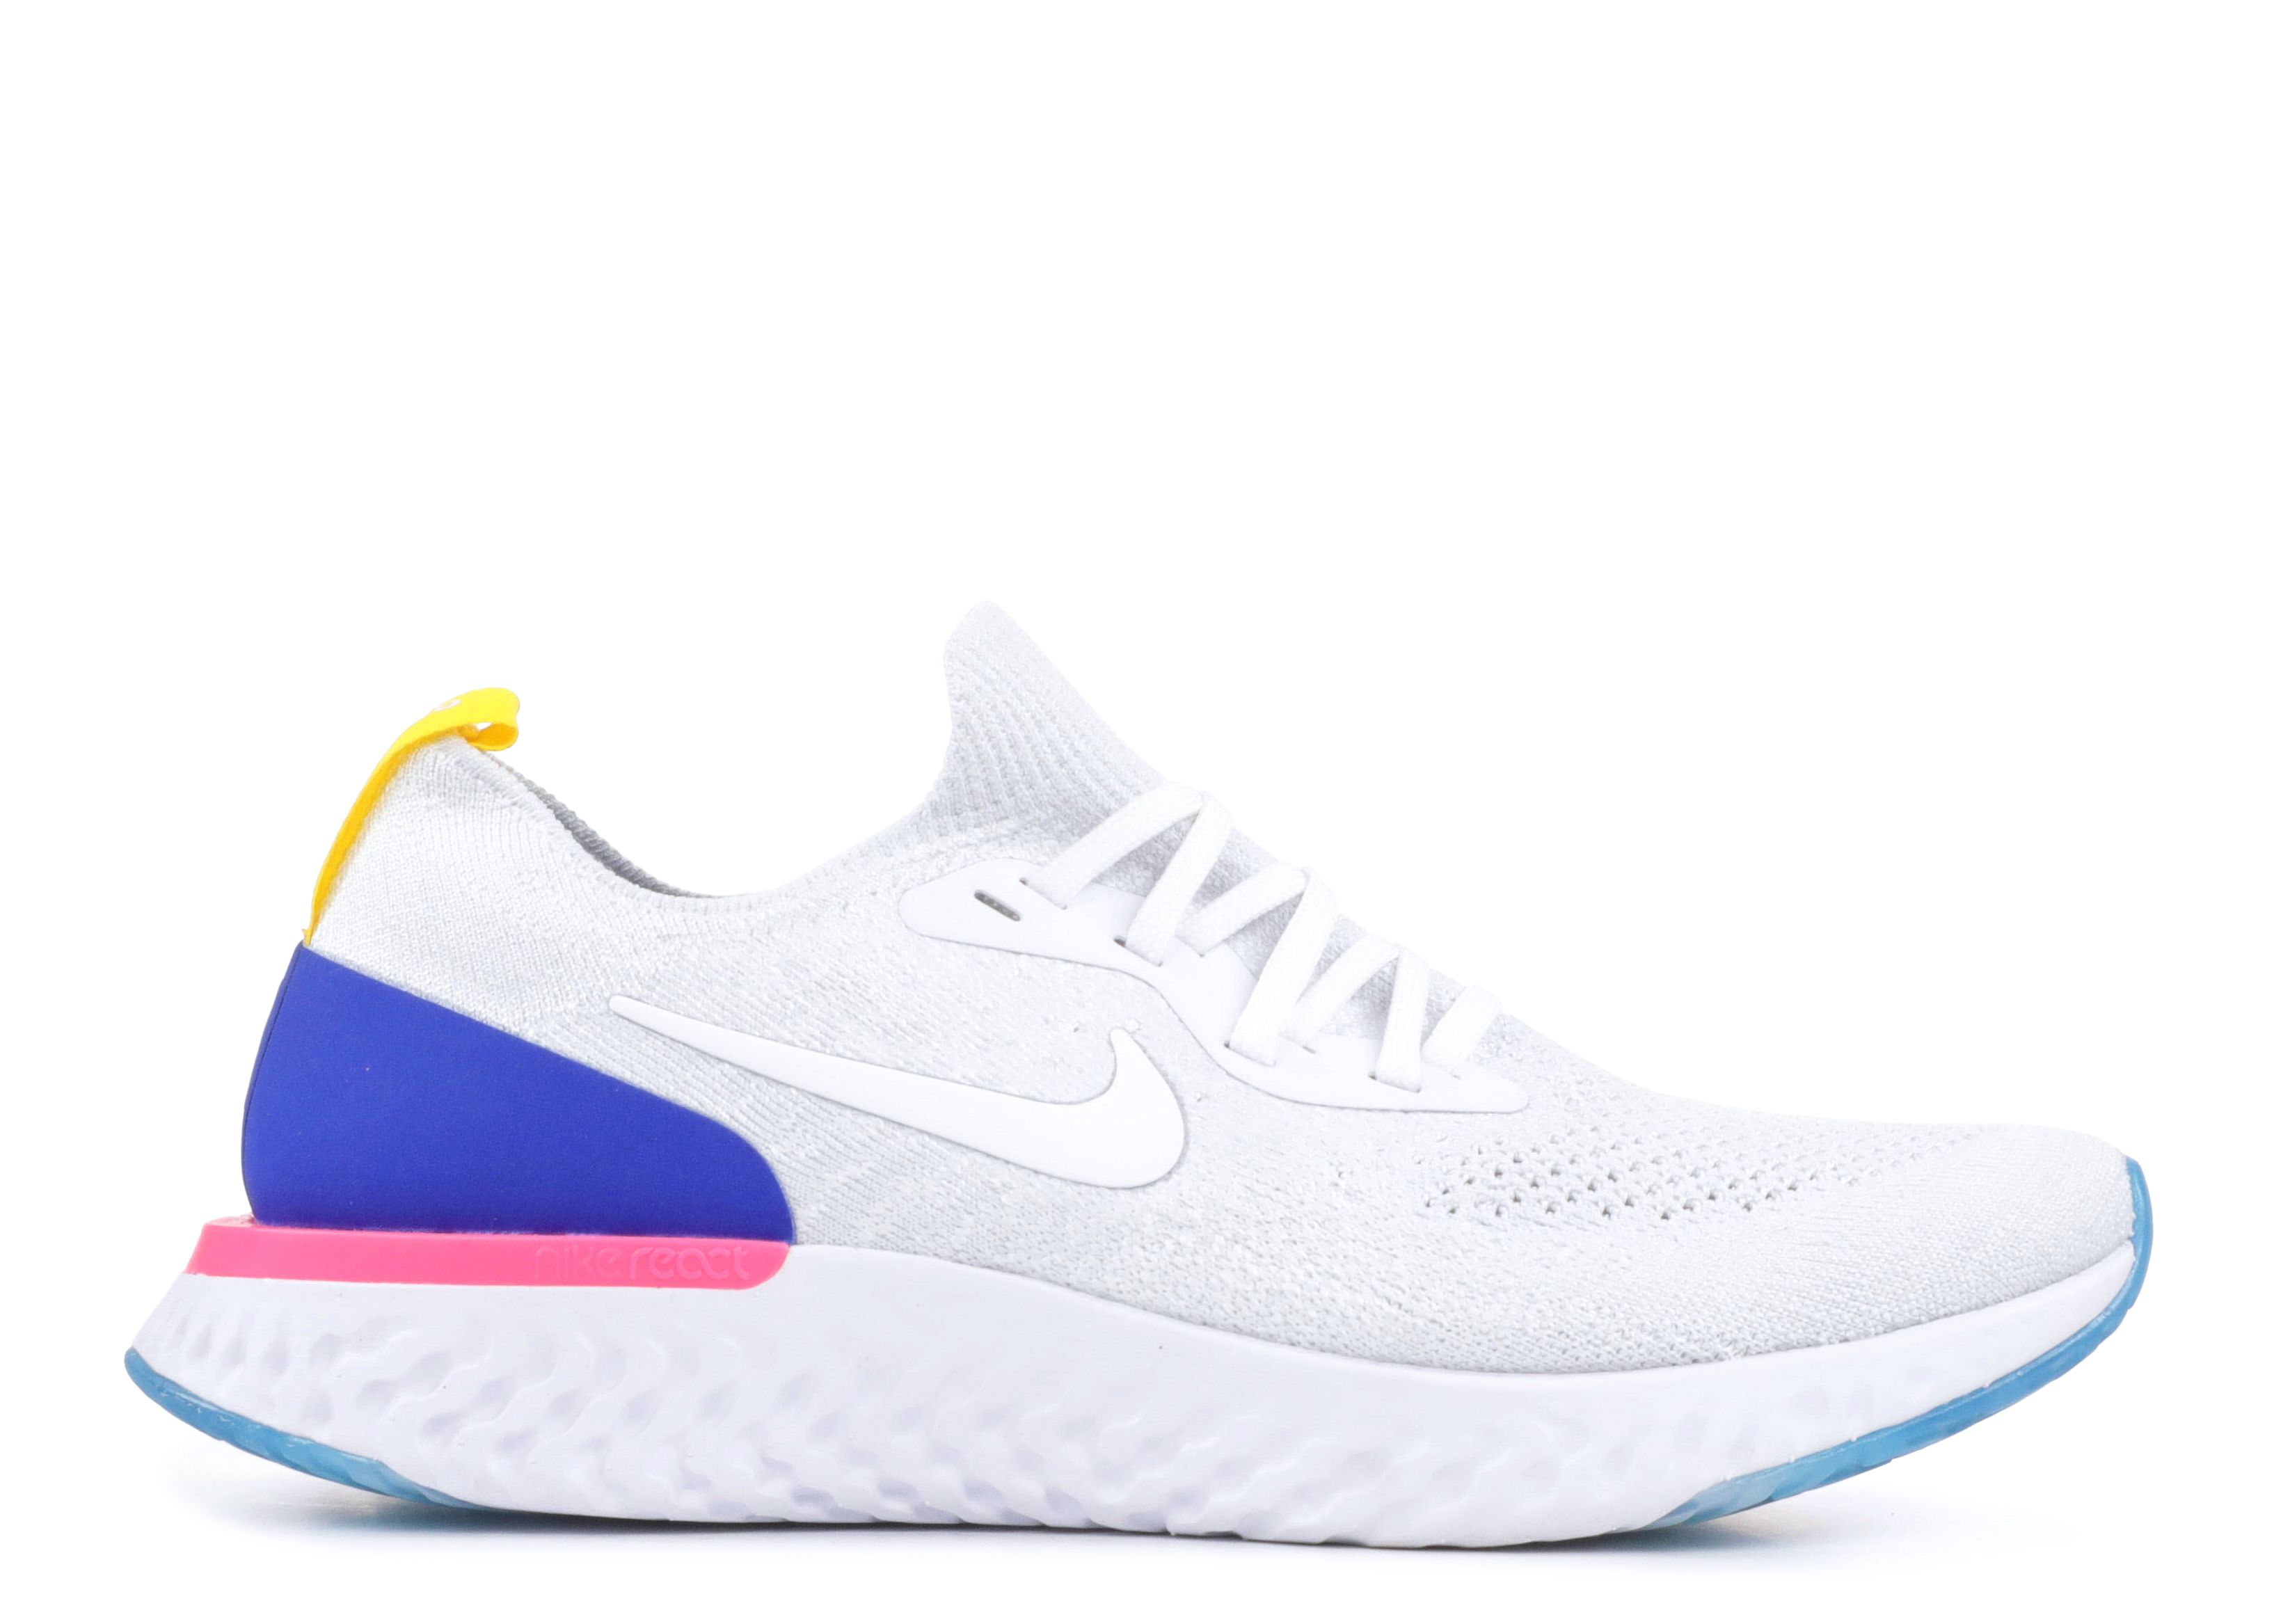 Кроссовки Nike Wmns Epic React Flyknit 'Og', белый nike epic react flyknit women s rhea braided flying woven running shoes size 36 40